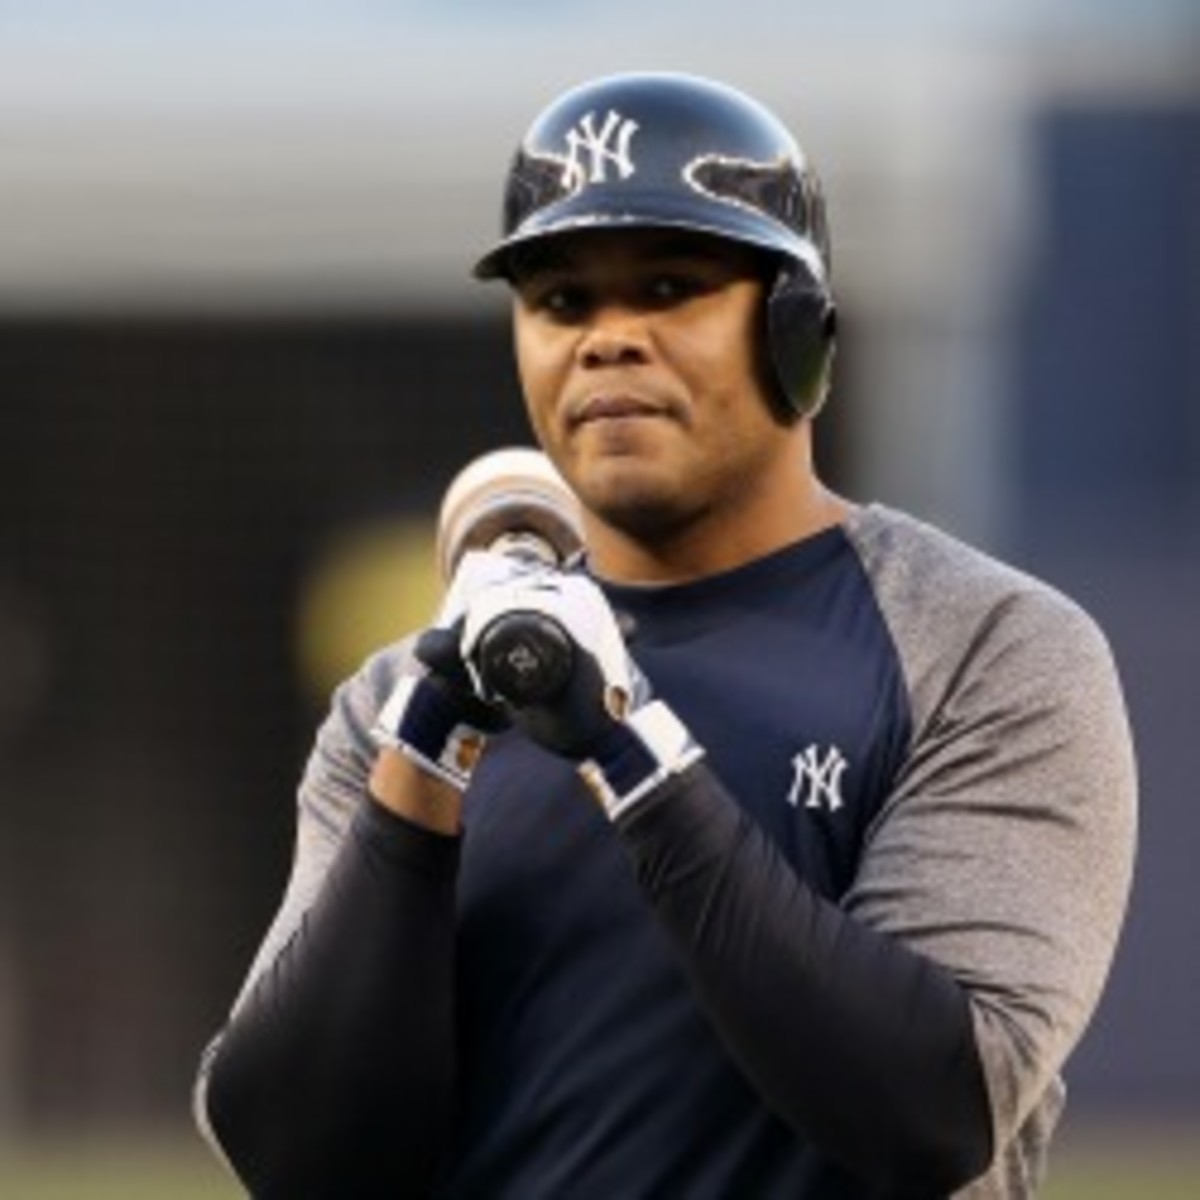 Ex-MLB outfielder Andruw Jones was arrested and charged with battery on Tuesday. (Alex Trautwig/Getty Images)